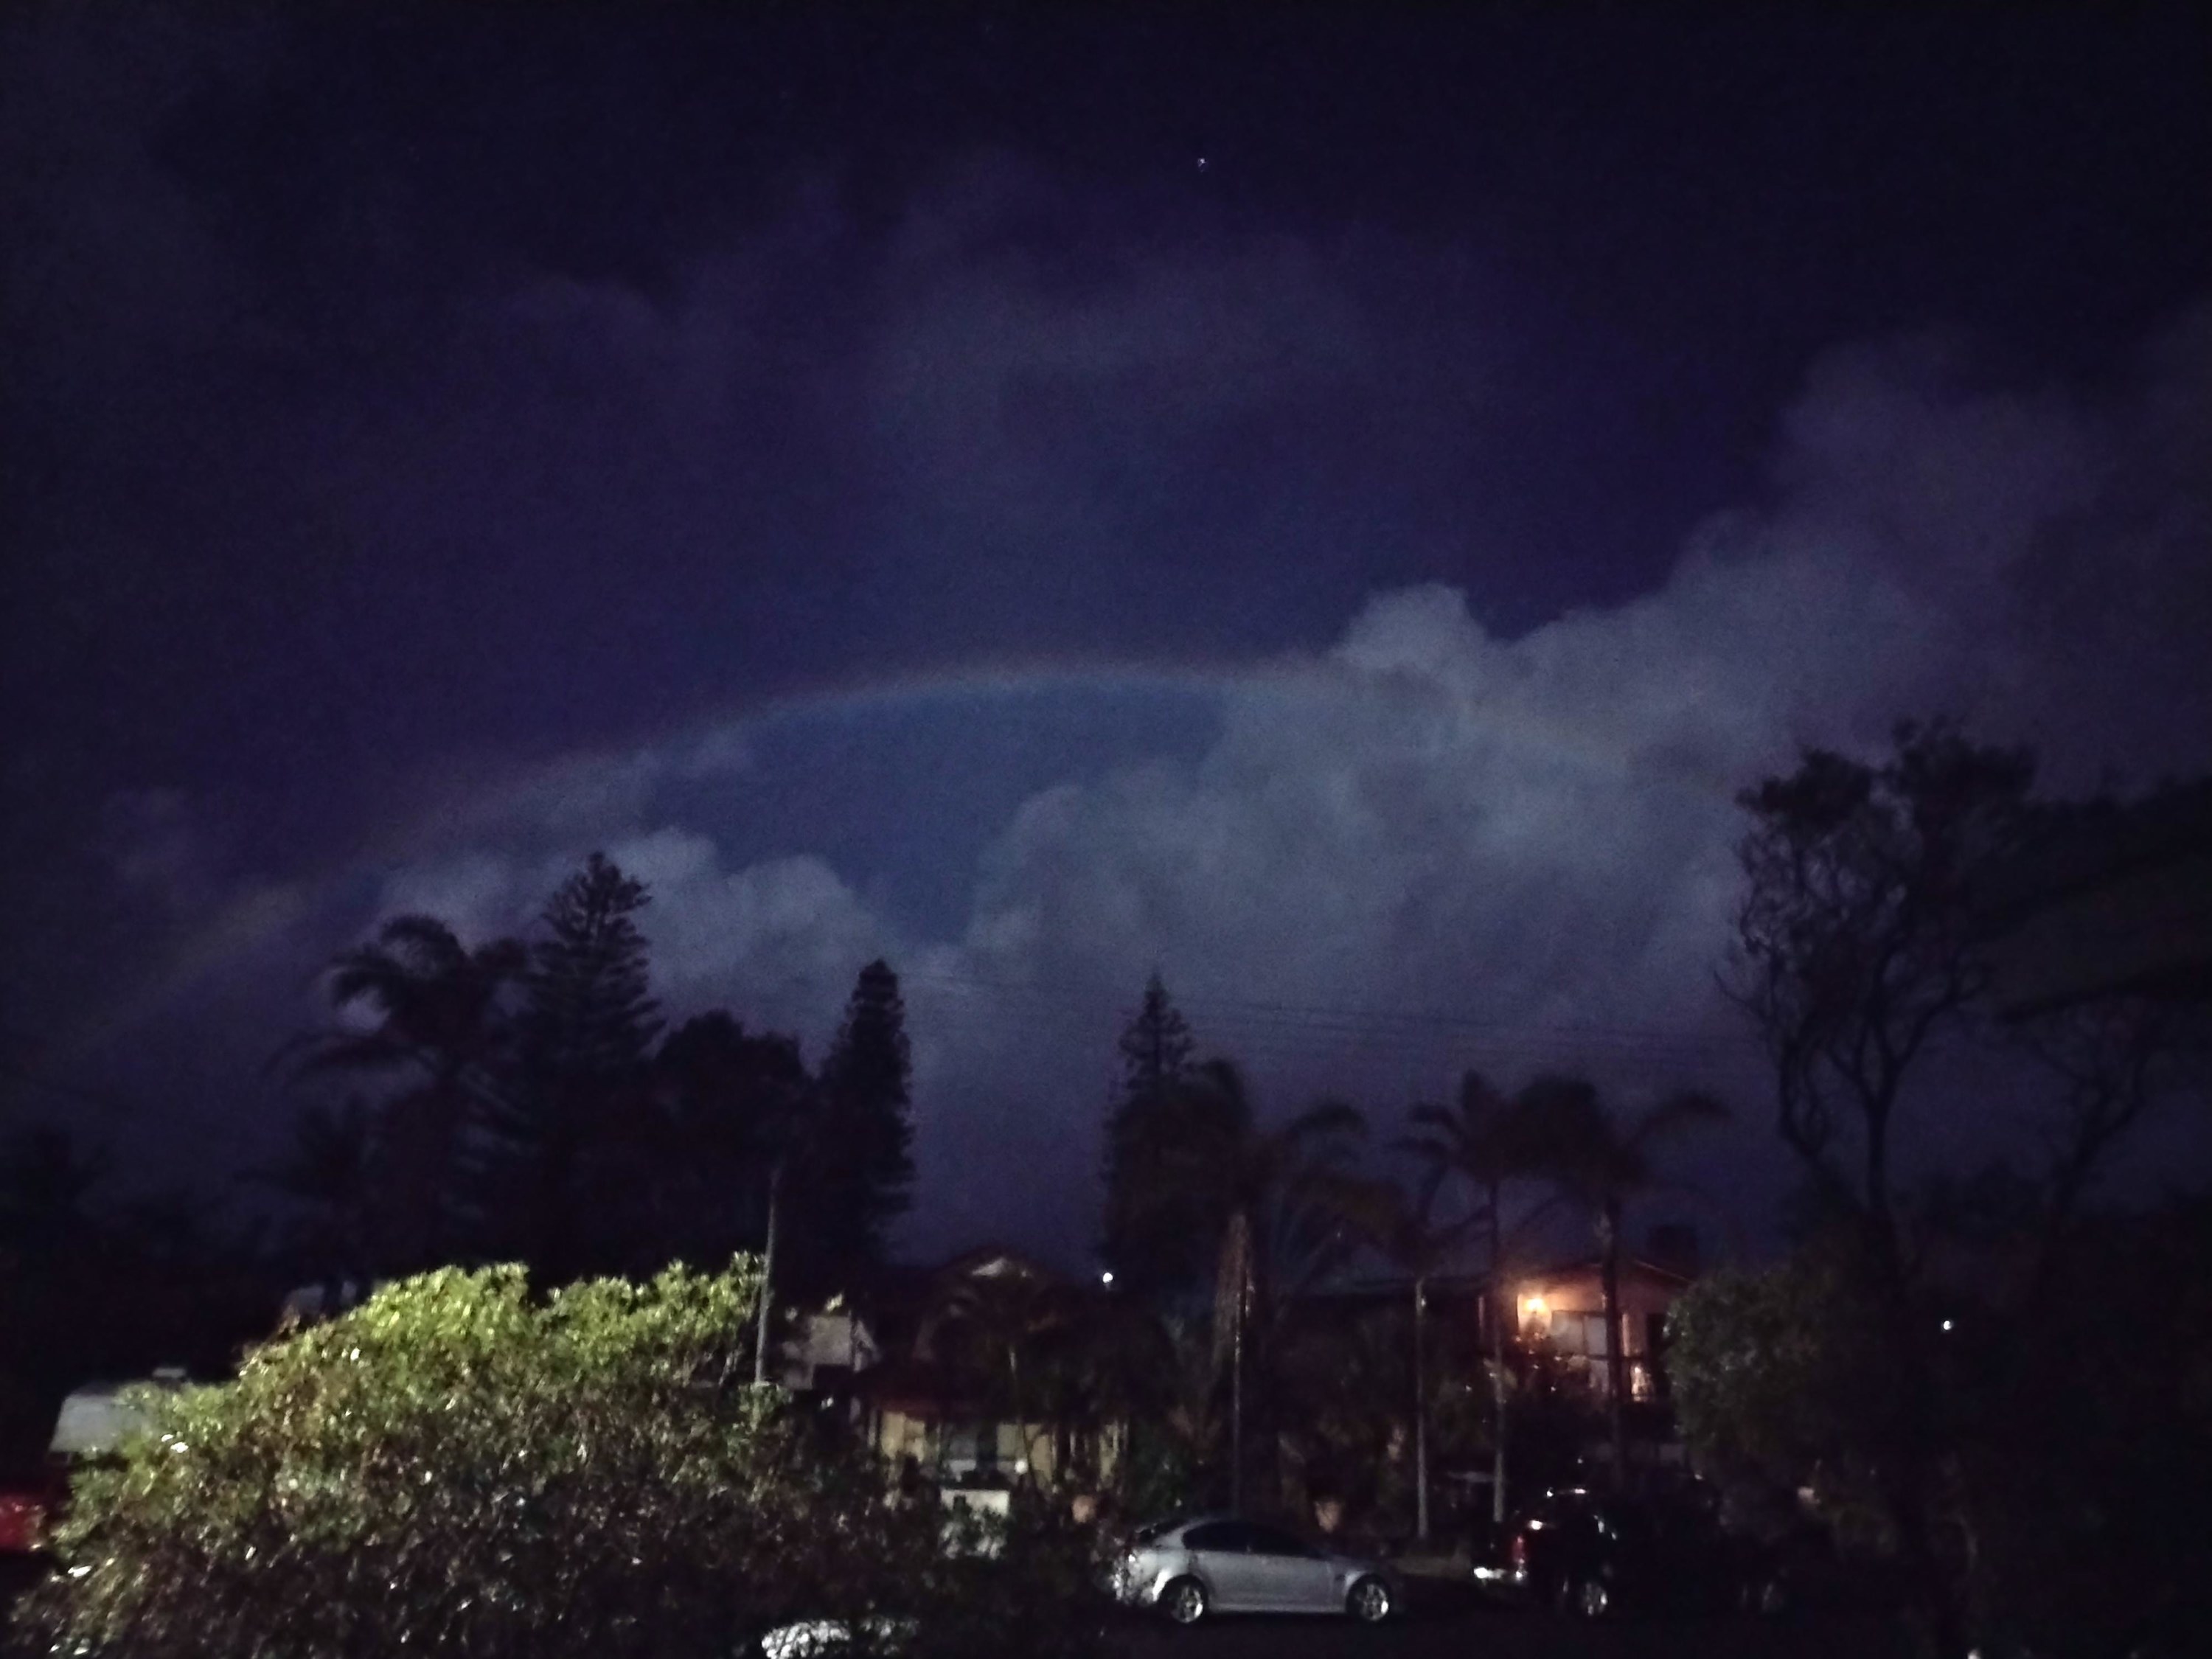 A rainbow behind clouds at night